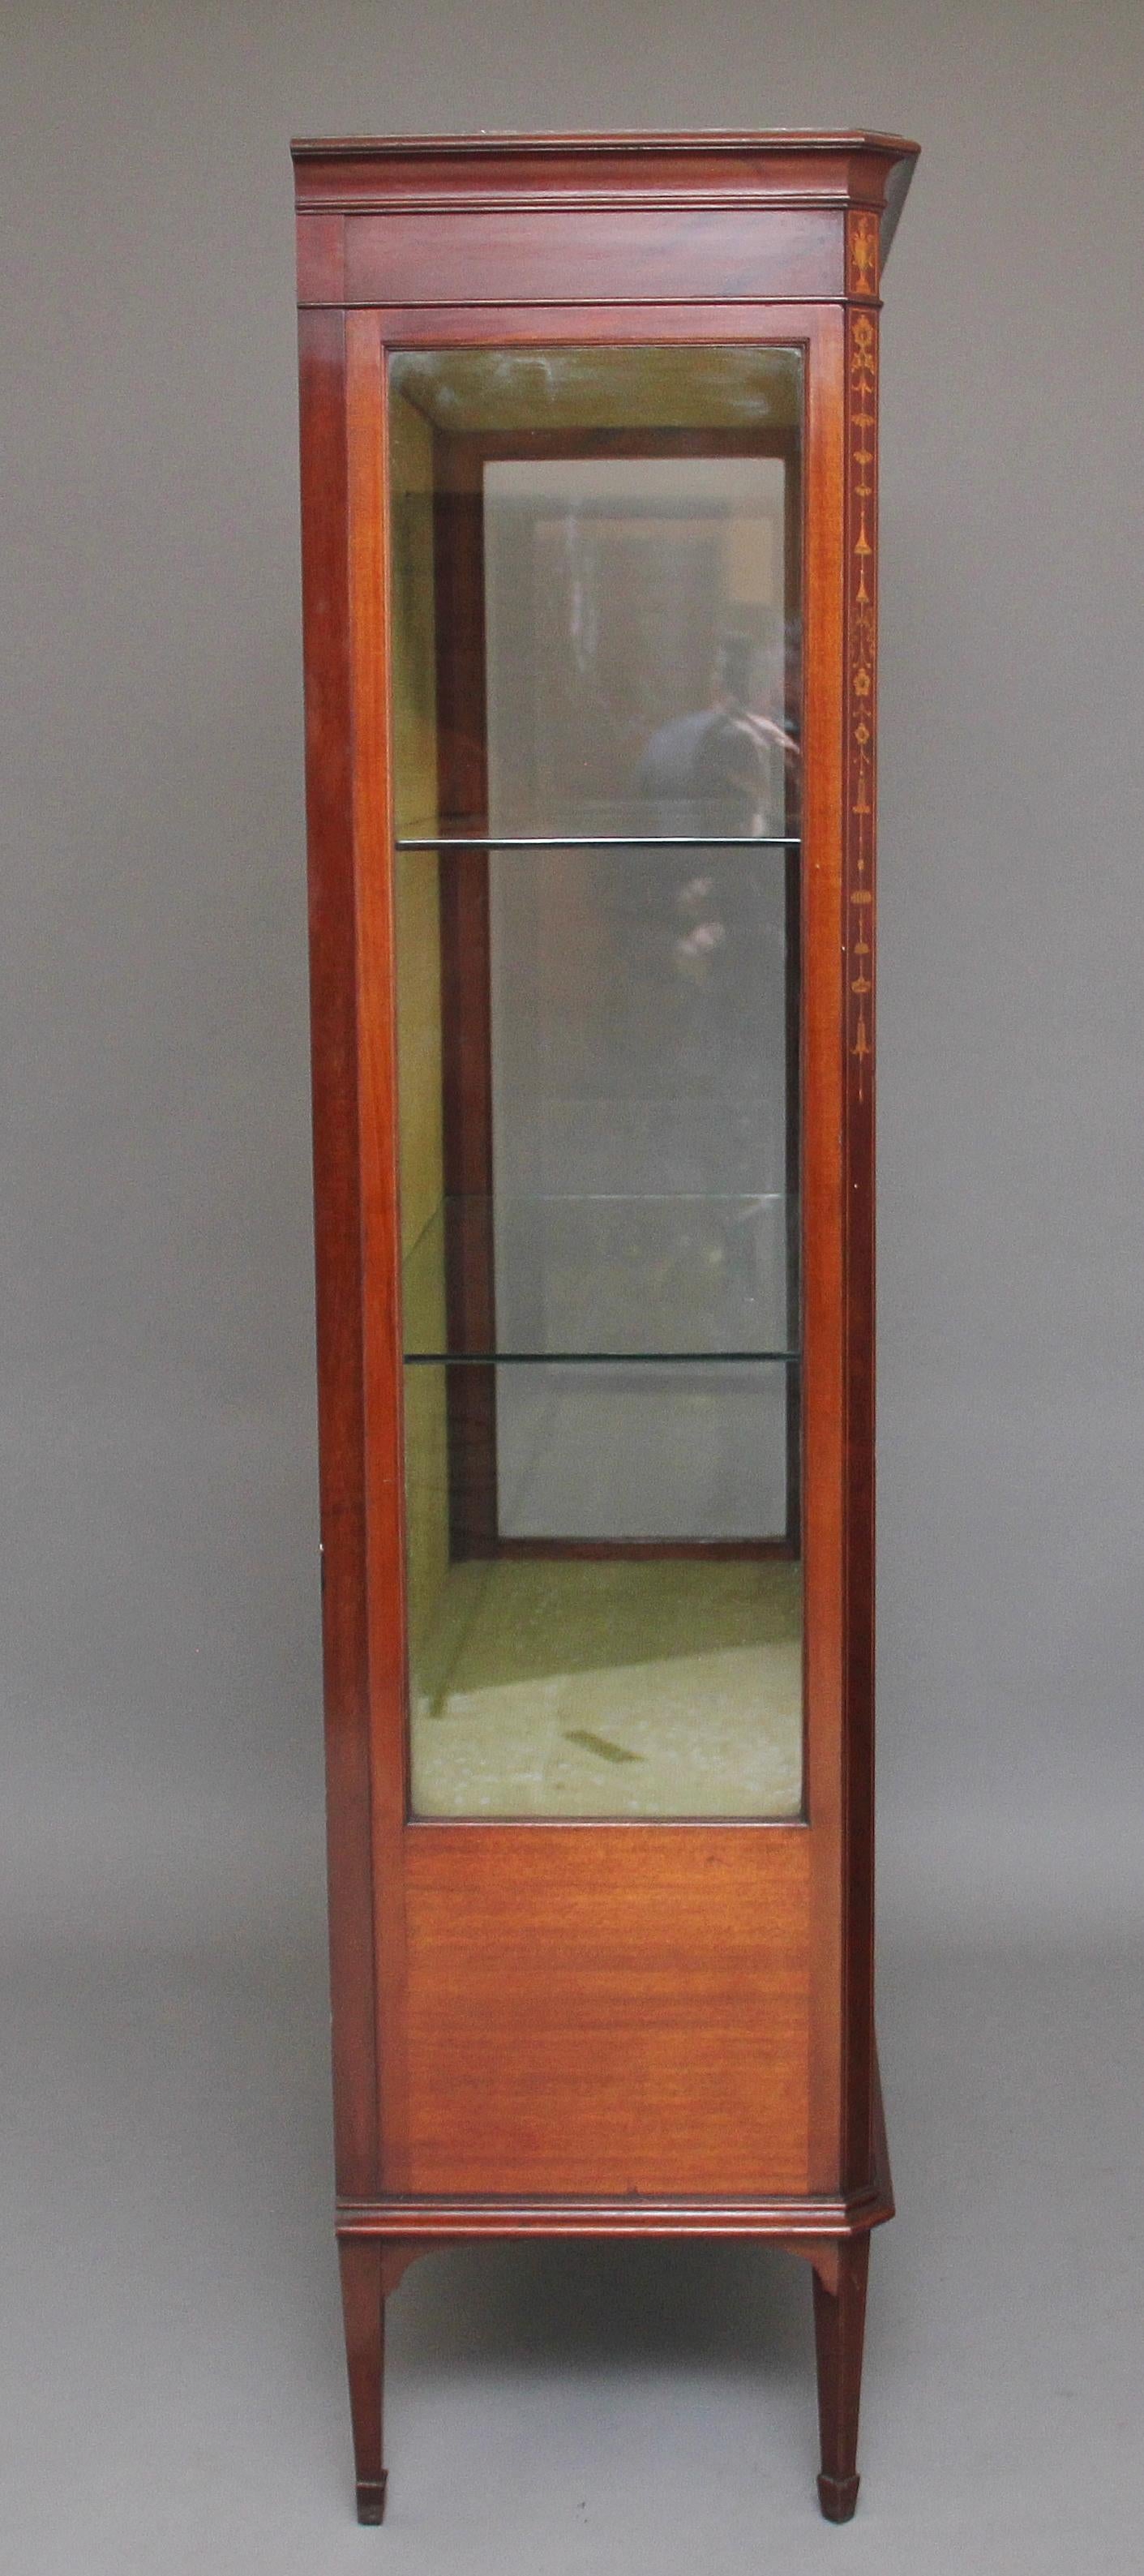 19th Century Mahogany and Inlaid Display Cabinet In Good Condition For Sale In Martlesham, GB